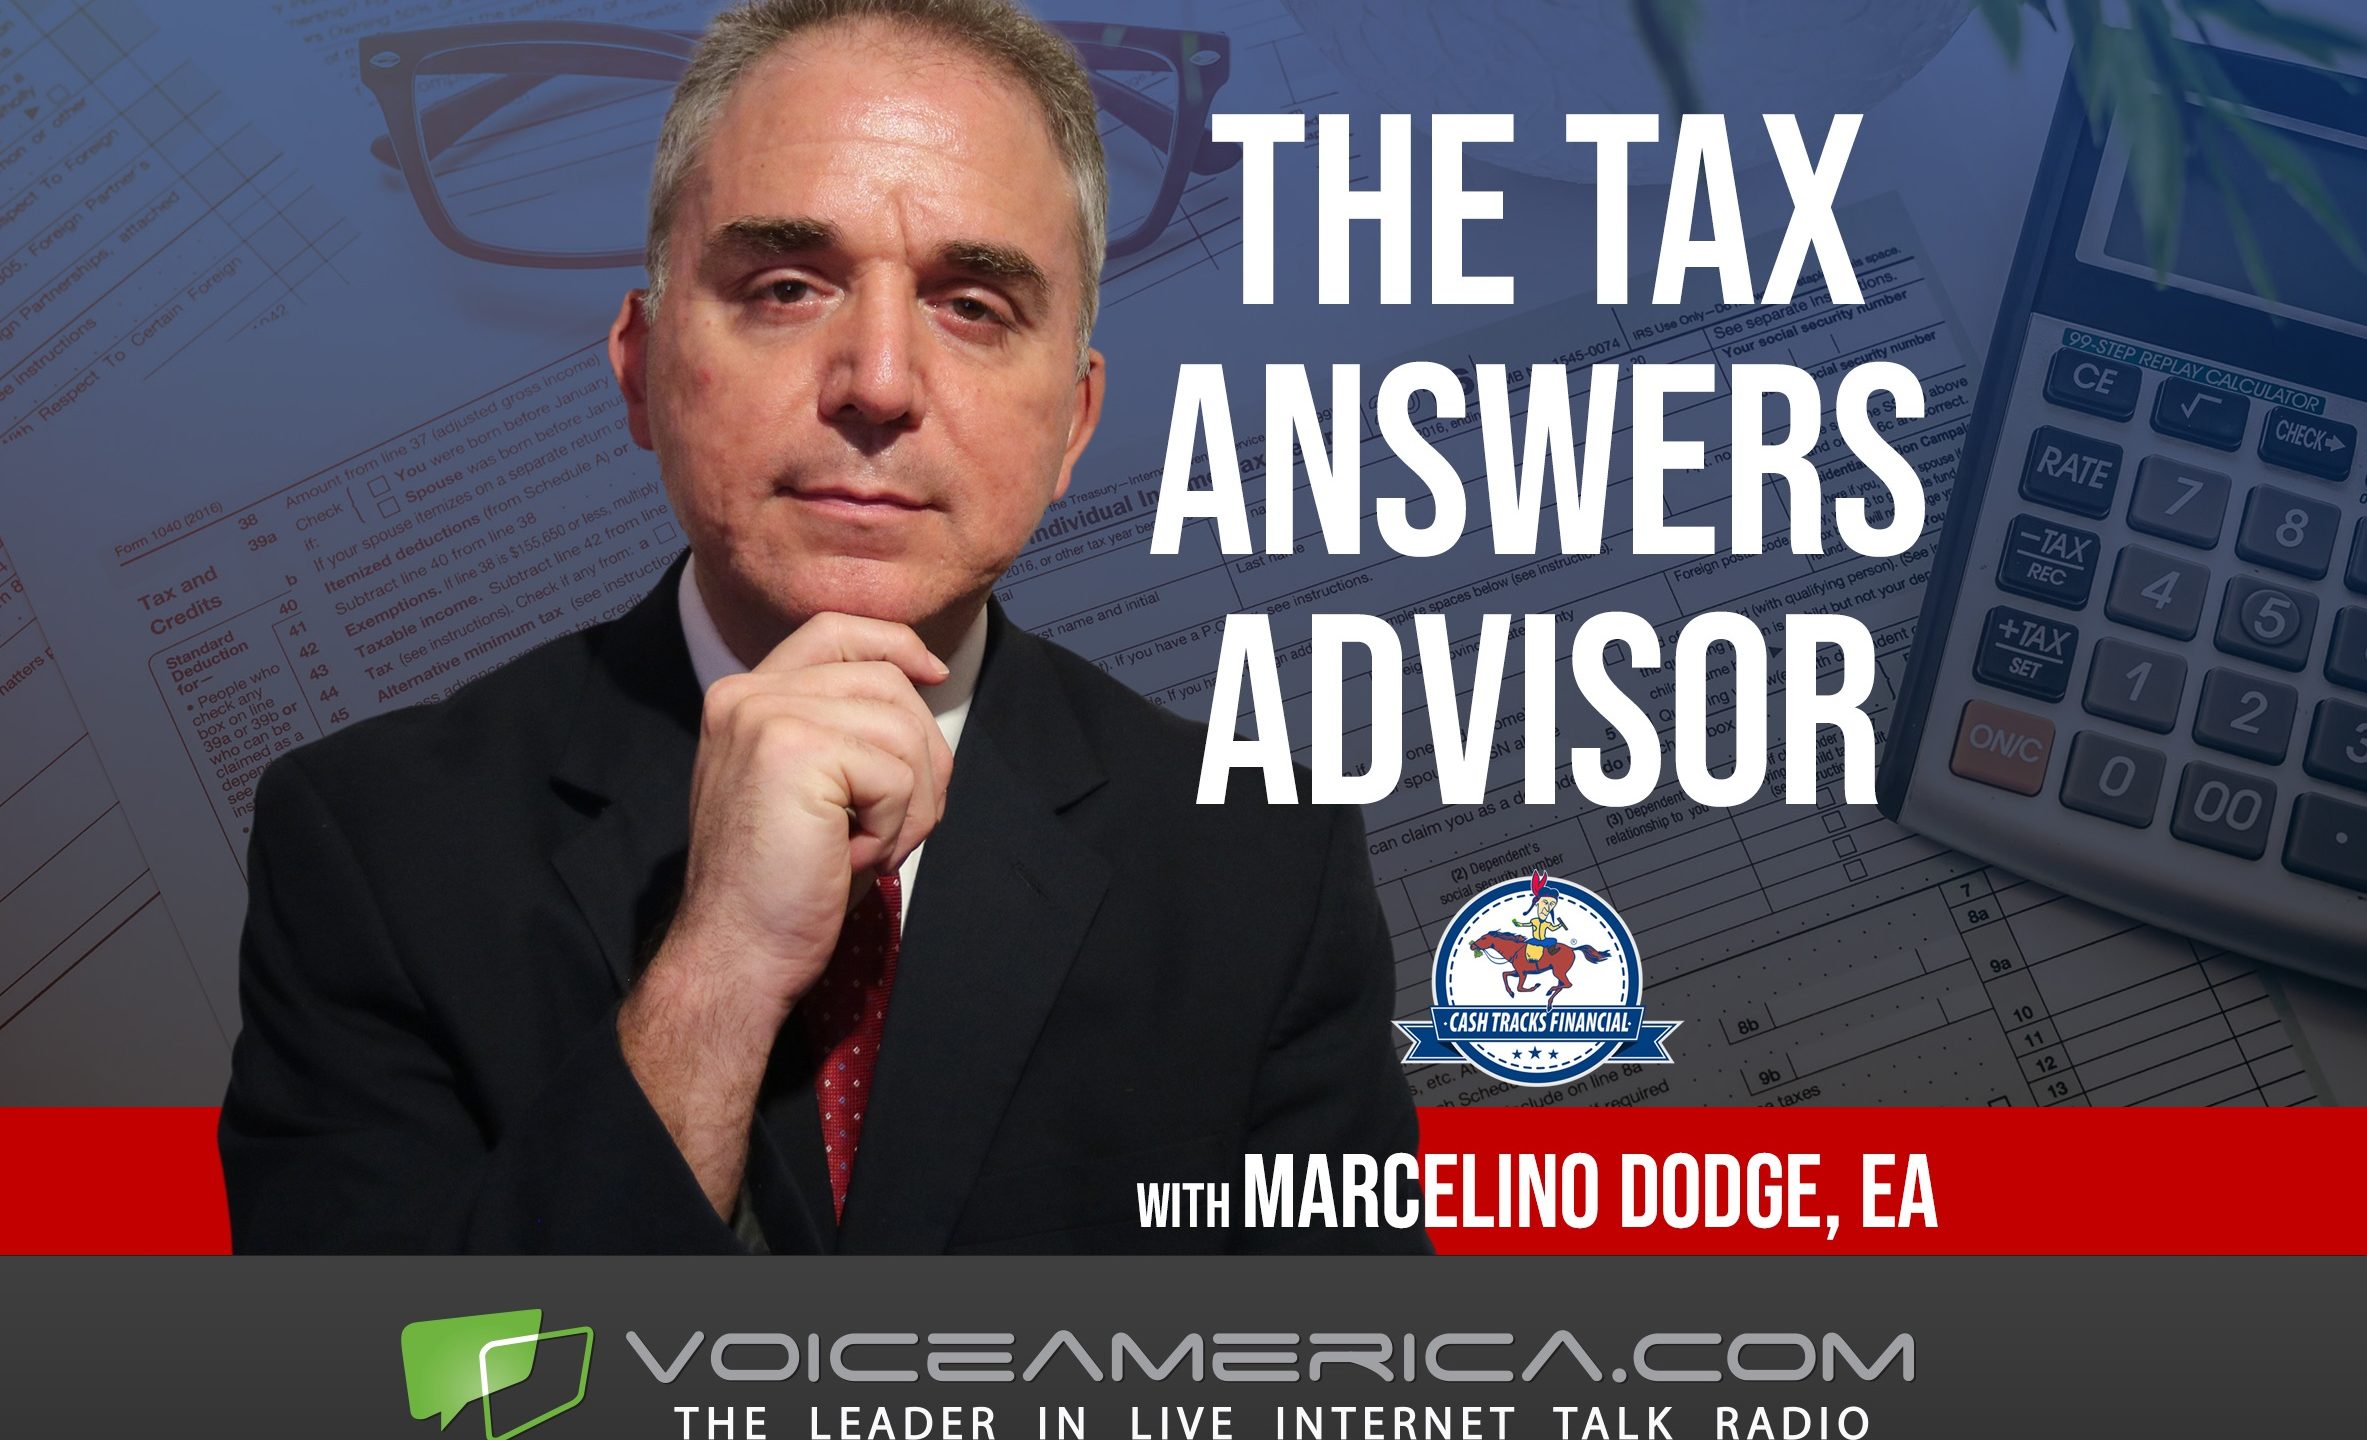 Welcome to The Tax Answers Advisor